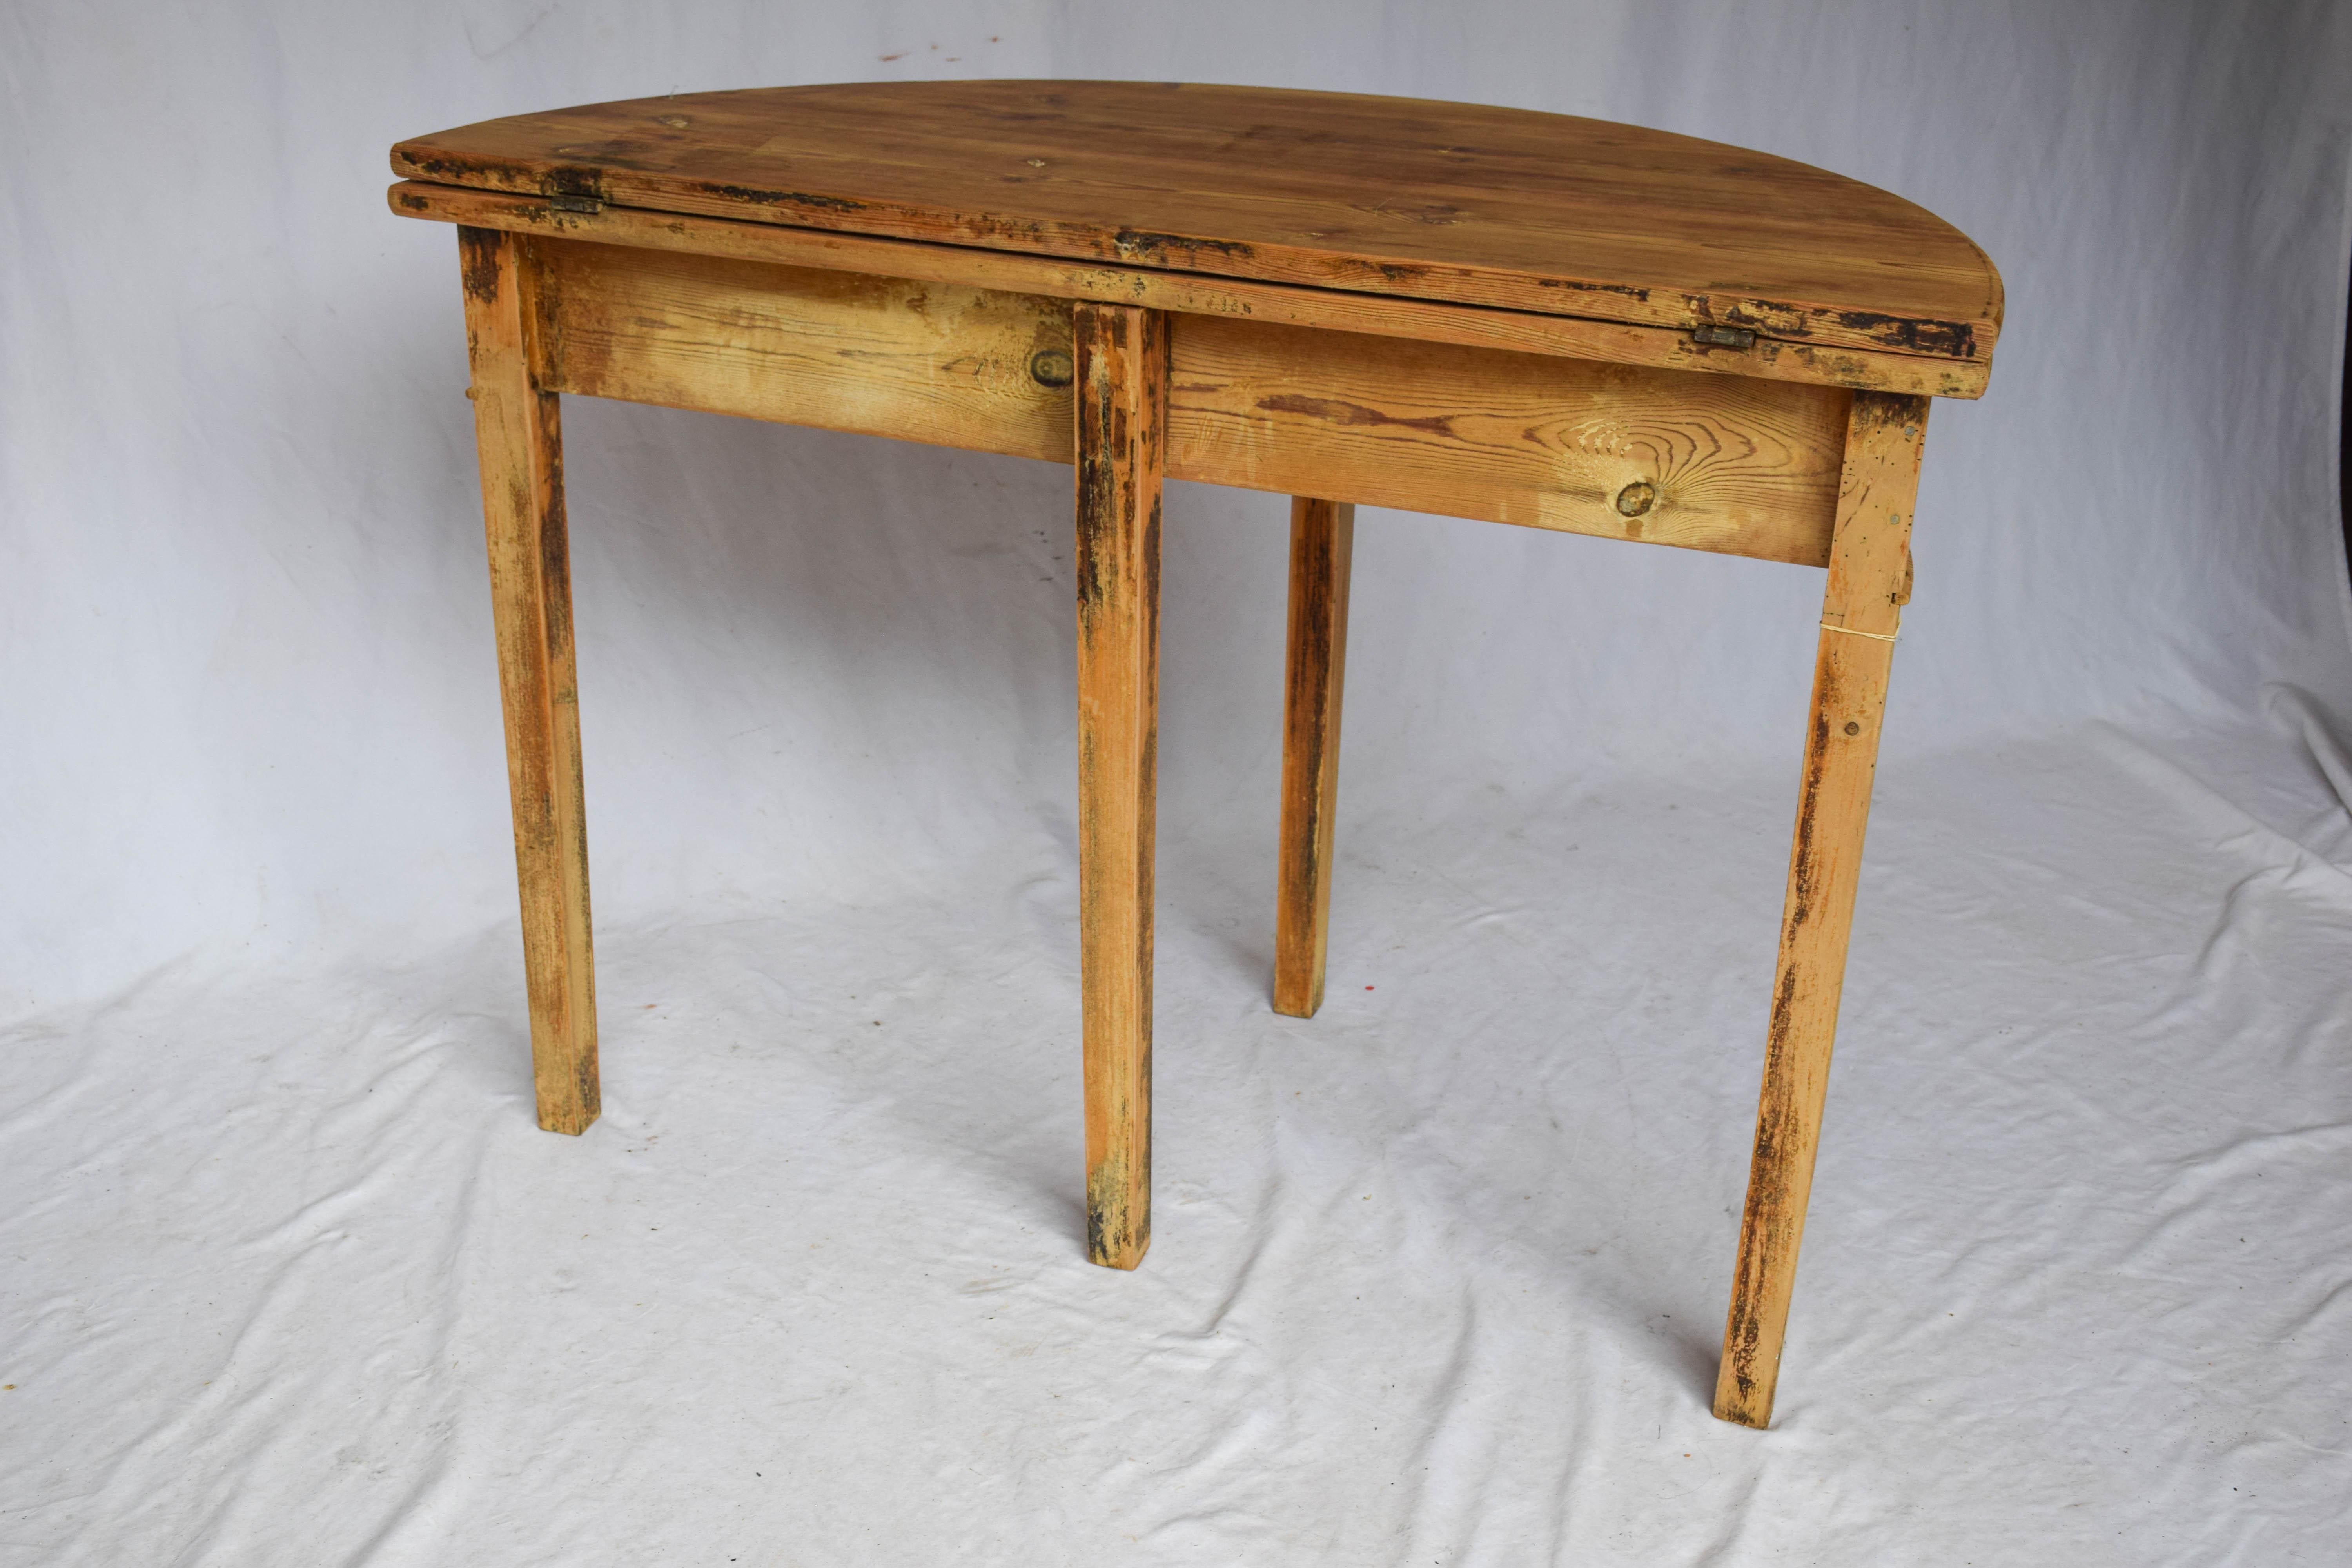 Demilune dropleaf table from France 1800s. Perfect for any niche in your home. 

Measures: 23